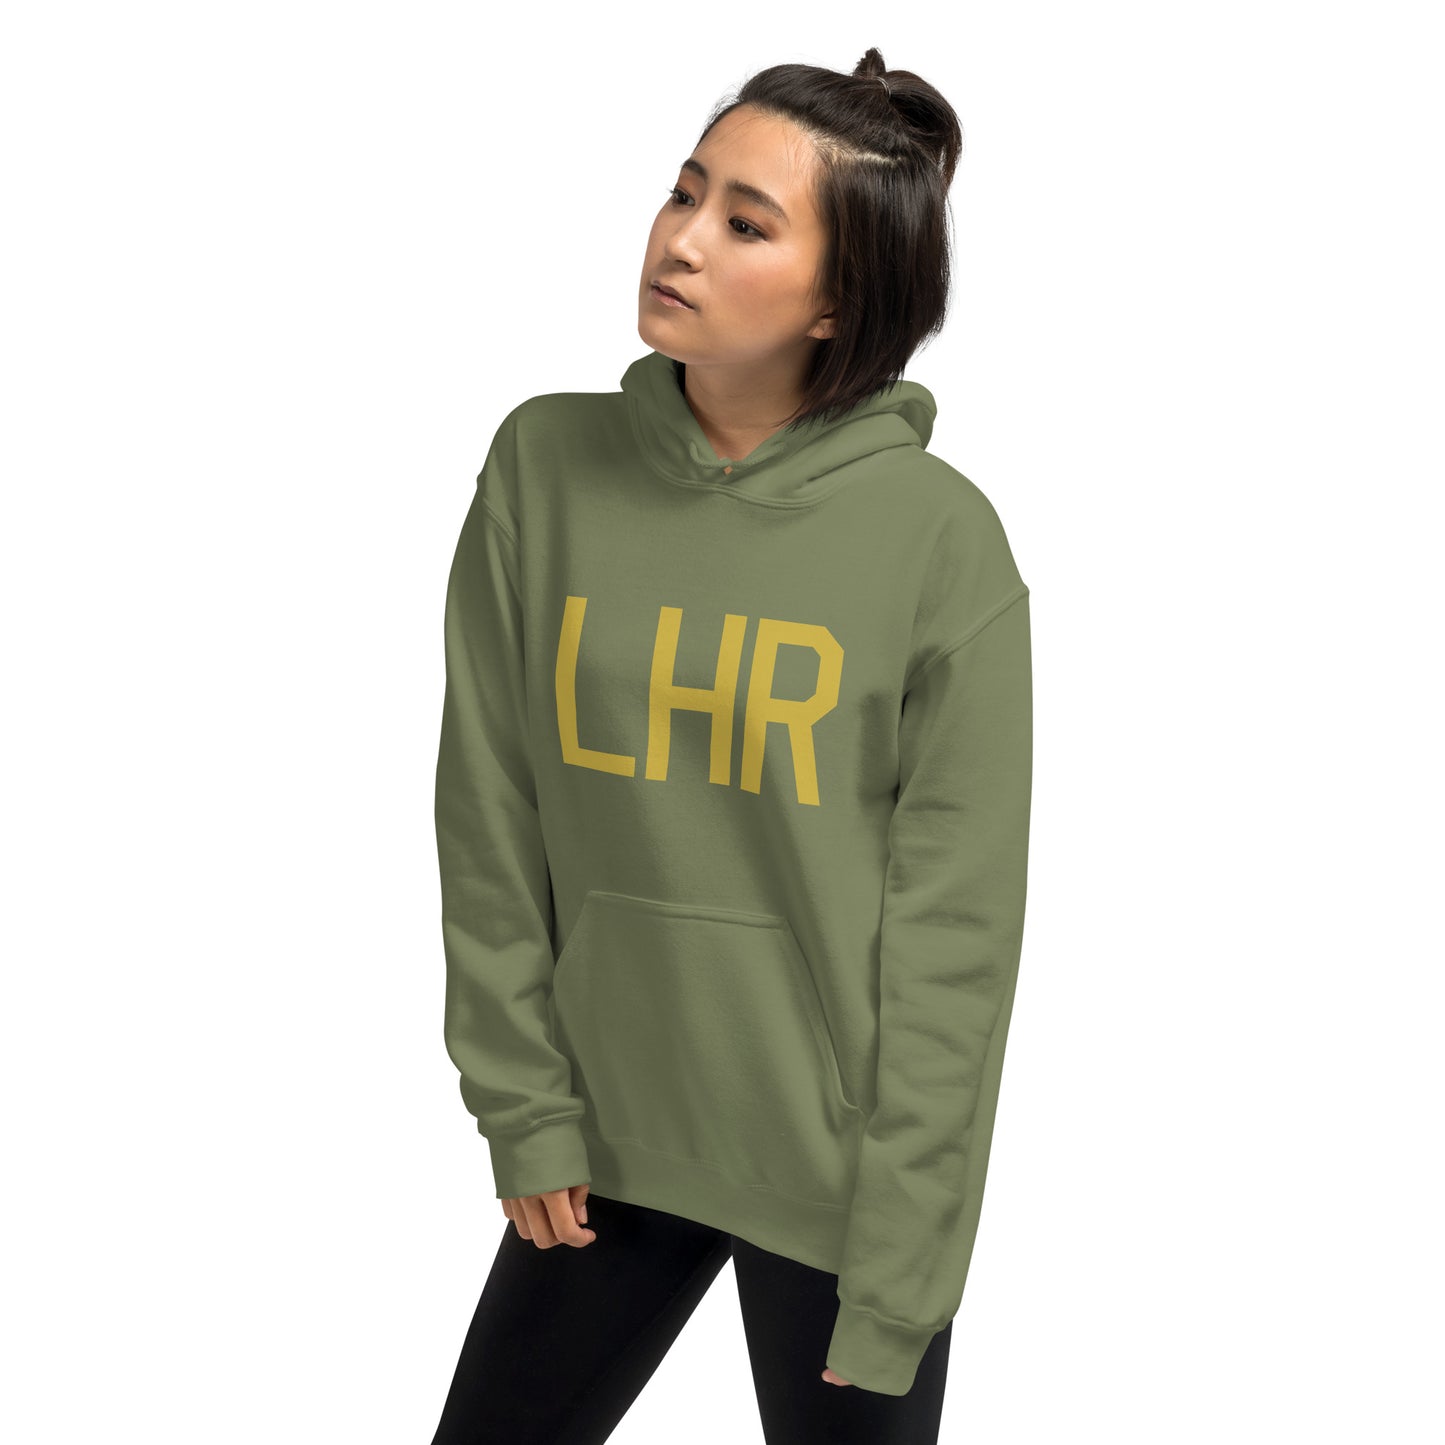 Aviation Gift Unisex Hoodie - Old Gold Graphic • LHR London • YHM Designs - Image 10